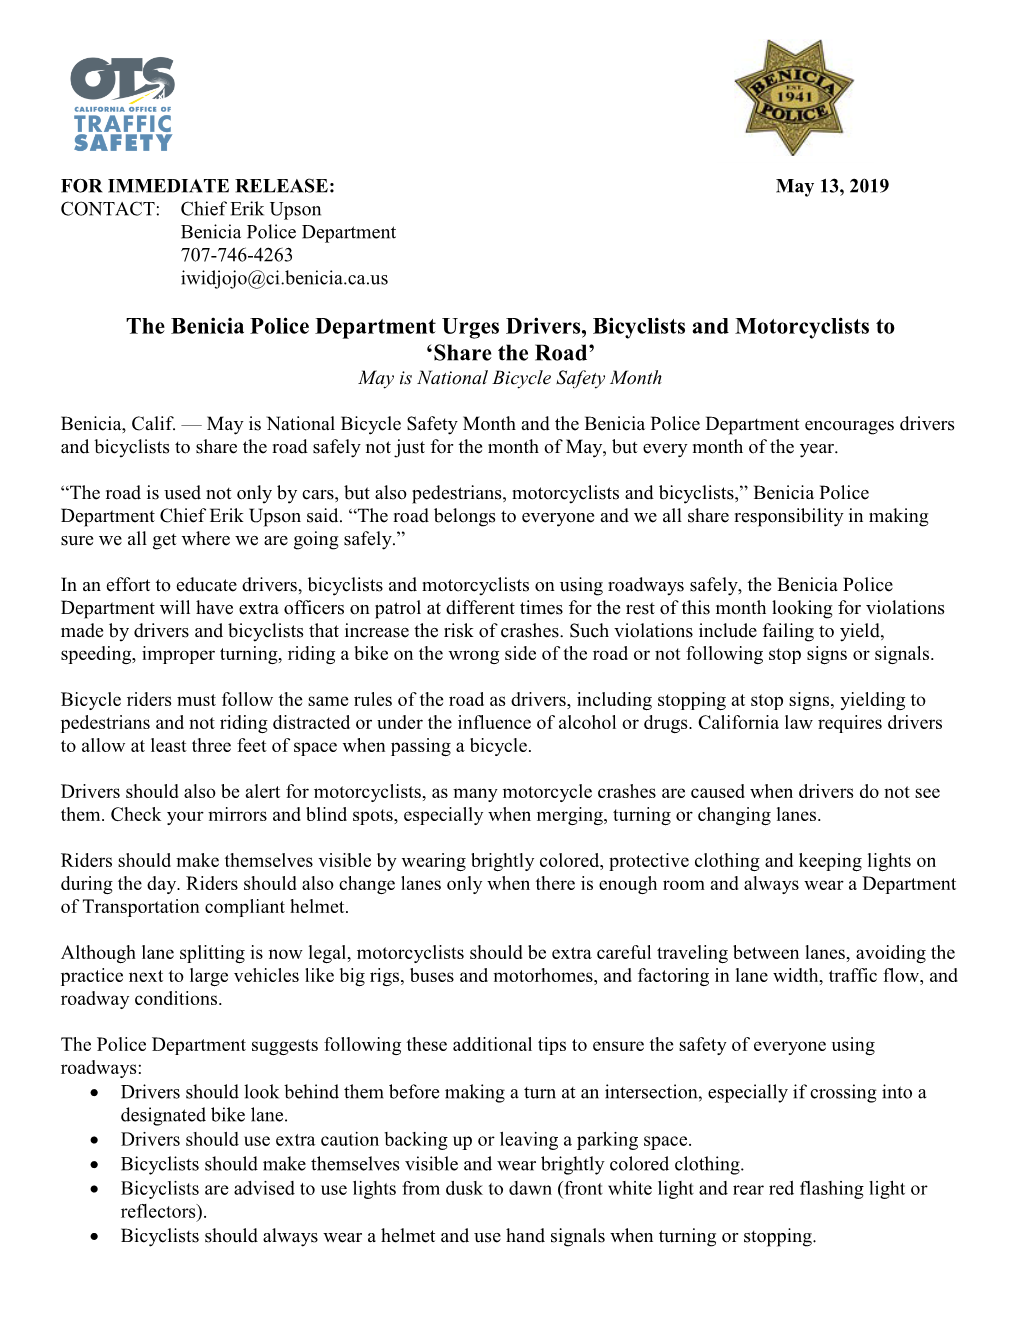 The Benicia Police Department Urges Drivers, Bicyclists and Motorcyclists to ‘Share the Road’ May Is National Bicycle Safety Month